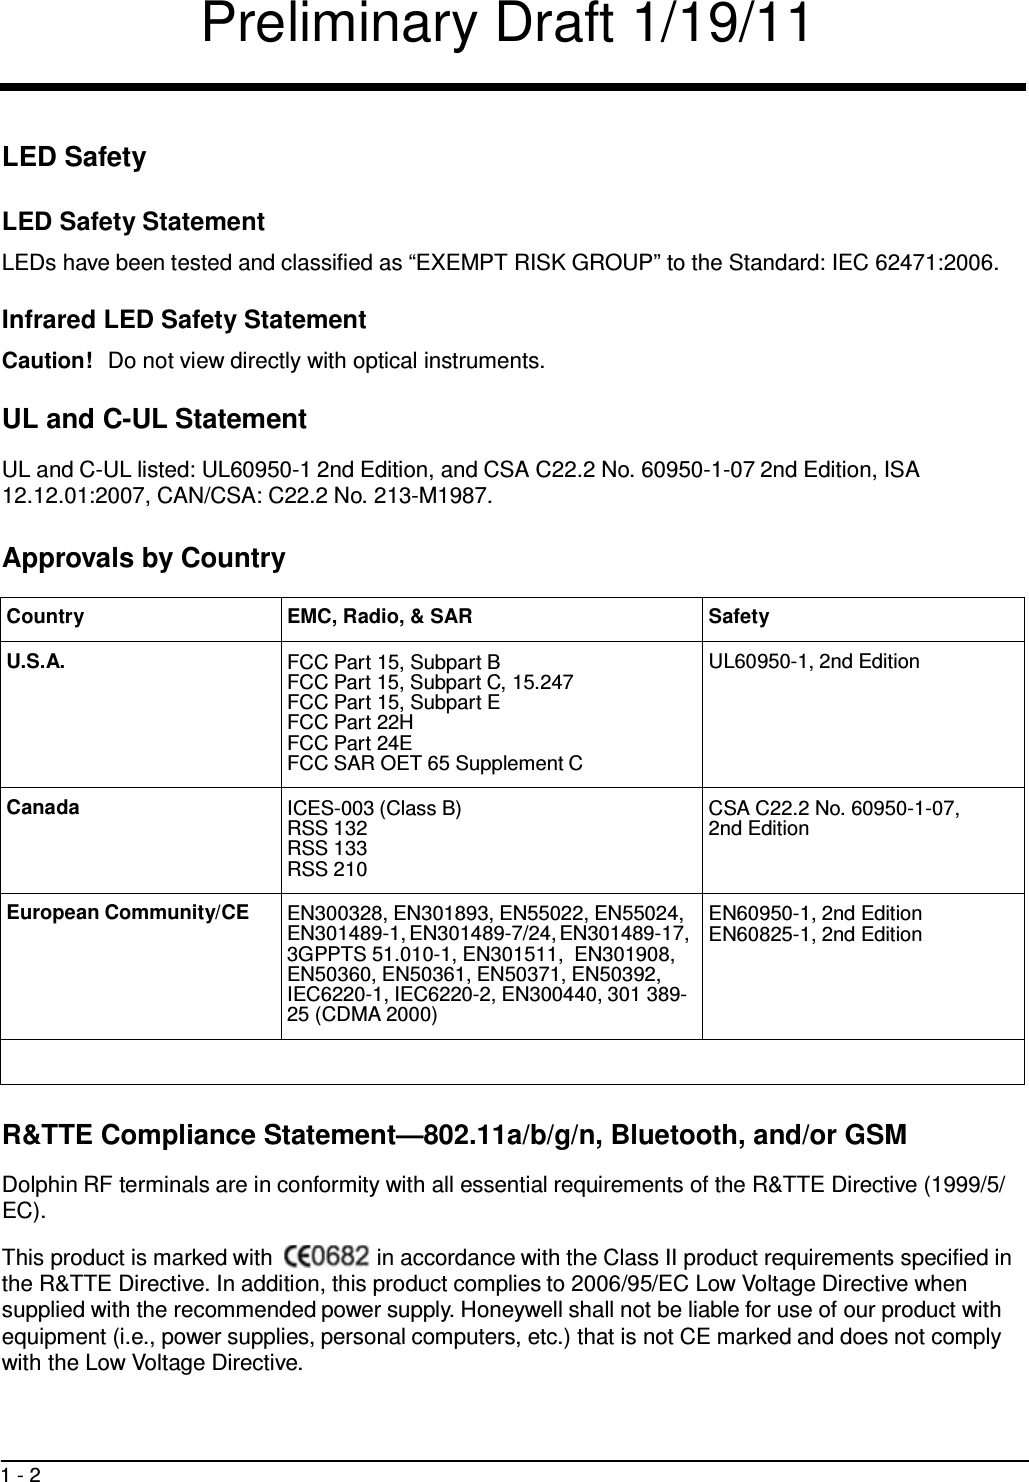 Preliminary Draft 1/19/11 1 - 2     LED Safety   LED Safety Statement  LEDs have been tested and classified as “EXEMPT RISK GROUP” to the Standard: IEC 62471:2006.  Infrared LED Safety Statement  Caution!   Do not view directly with optical instruments.  UL and C-UL Statement  UL and C-UL listed: UL60950-1 2nd Edition, and CSA C22.2 No. 60950-1-07 2nd Edition, ISA 12.12.01:2007, CAN/CSA: C22.2 No. 213-M1987.   Approvals by Country  Country EMC, Radio, &amp; SAR Safety U.S.A. FCC Part 15, Subpart B FCC Part 15, Subpart C, 15.247 FCC Part 15, Subpart E FCC Part 22H FCC Part 24E FCC SAR OET 65 Supplement C UL60950-1, 2nd Edition Canada  ICES-003 (Class B) RSS 132 RSS 133 RSS 210 CSA C22.2 No. 60950-1-07, 2nd Edition European Community/CE  EN300328, EN301893, EN55022, EN55024, EN301489-1, EN301489-7/24, EN301489-17, 3GPPTS 51.010-1, EN301511,  EN301908, EN50360, EN50361, EN50371, EN50392, IEC6220-1, IEC6220-2, EN300440, 301 389- 25 (CDMA 2000) EN60950-1, 2nd Edition EN60825-1, 2nd Edition    R&amp;TTE Compliance Statement—802.11a/b/g/n, Bluetooth, and/or GSM  Dolphin RF terminals are in conformity with all essential requirements of the R&amp;TTE Directive (1999/5/ EC).  This product is marked with  in accordance with the Class II product requirements specified in the R&amp;TTE Directive. In addition, this product complies to 2006/95/EC Low Voltage Directive when supplied with the recommended power supply. Honeywell shall not be liable for use of our product with equipment (i.e., power supplies, personal computers, etc.) that is not CE marked and does not comply with the Low Voltage Directive. 